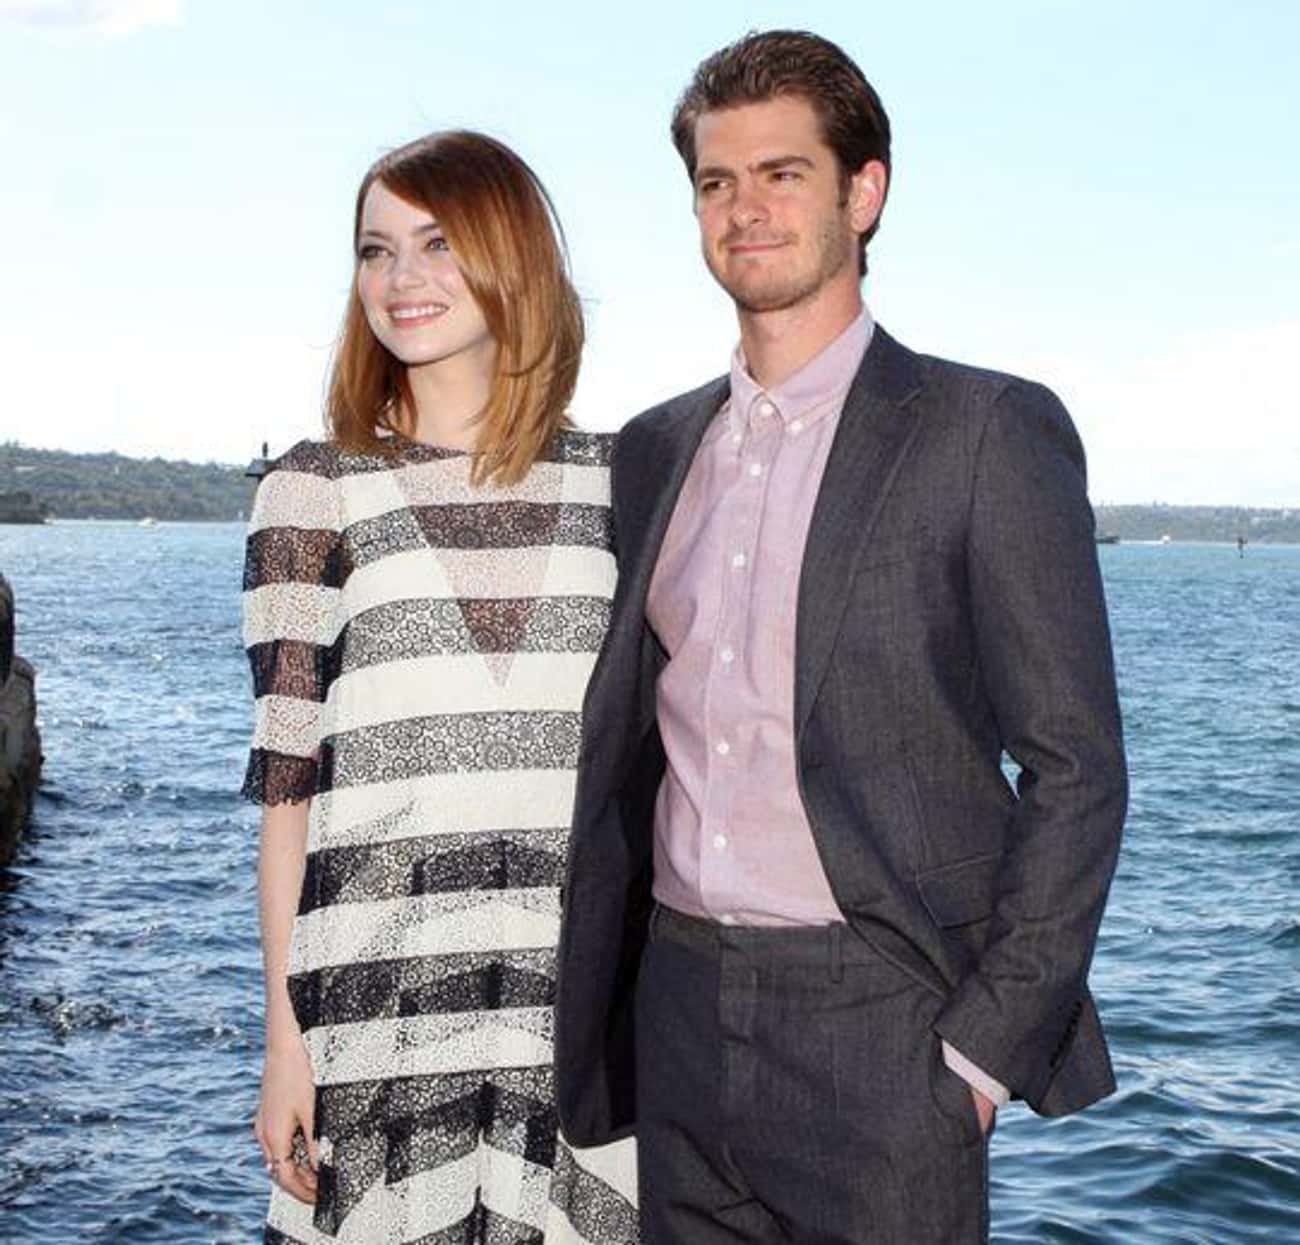 Emma Stone And Andrew Garfield Hold Up Signs Promoting Charities